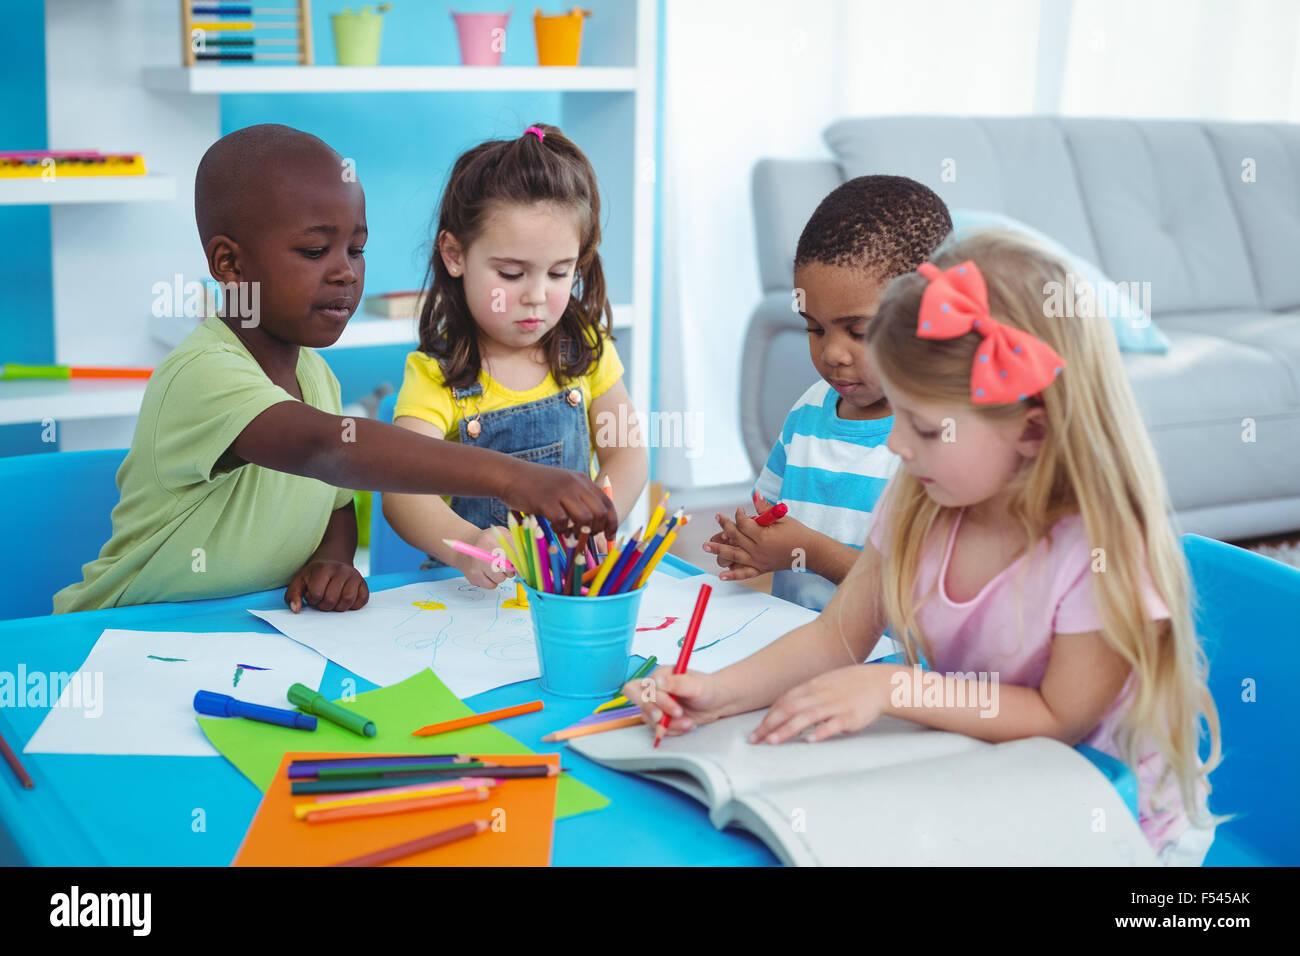 Happy kids enjoying arts and crafts together Stock Photo